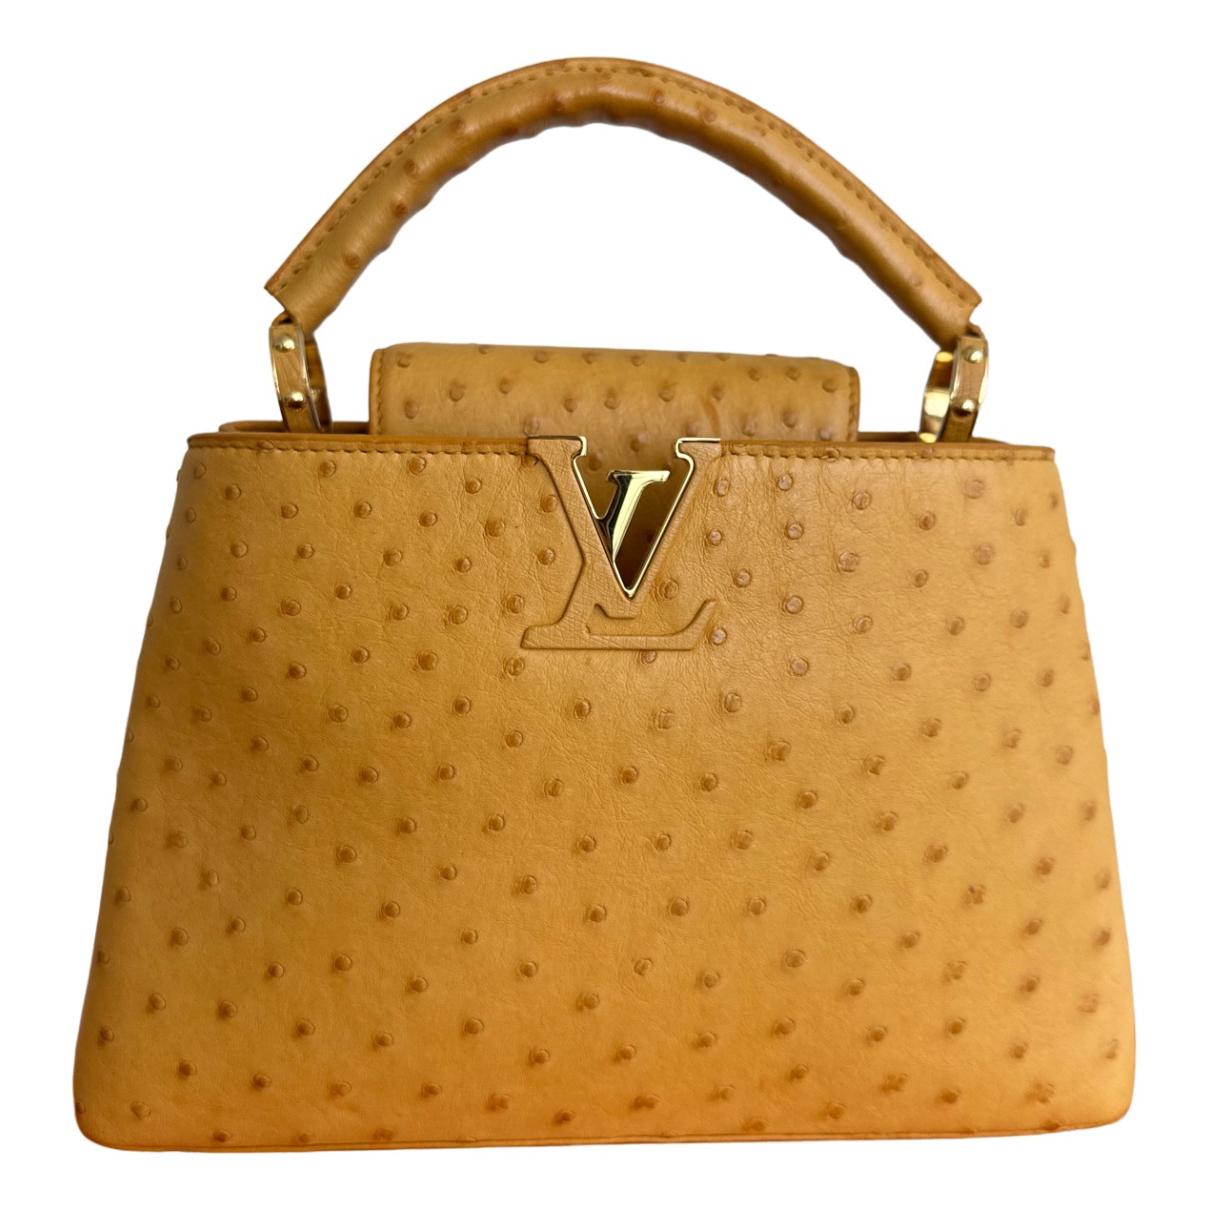 Louis Vuitton Rose Poudre Ostrich Capucines Bb Gold Hardware, 2020 (Like New), Pink Womens Handbag